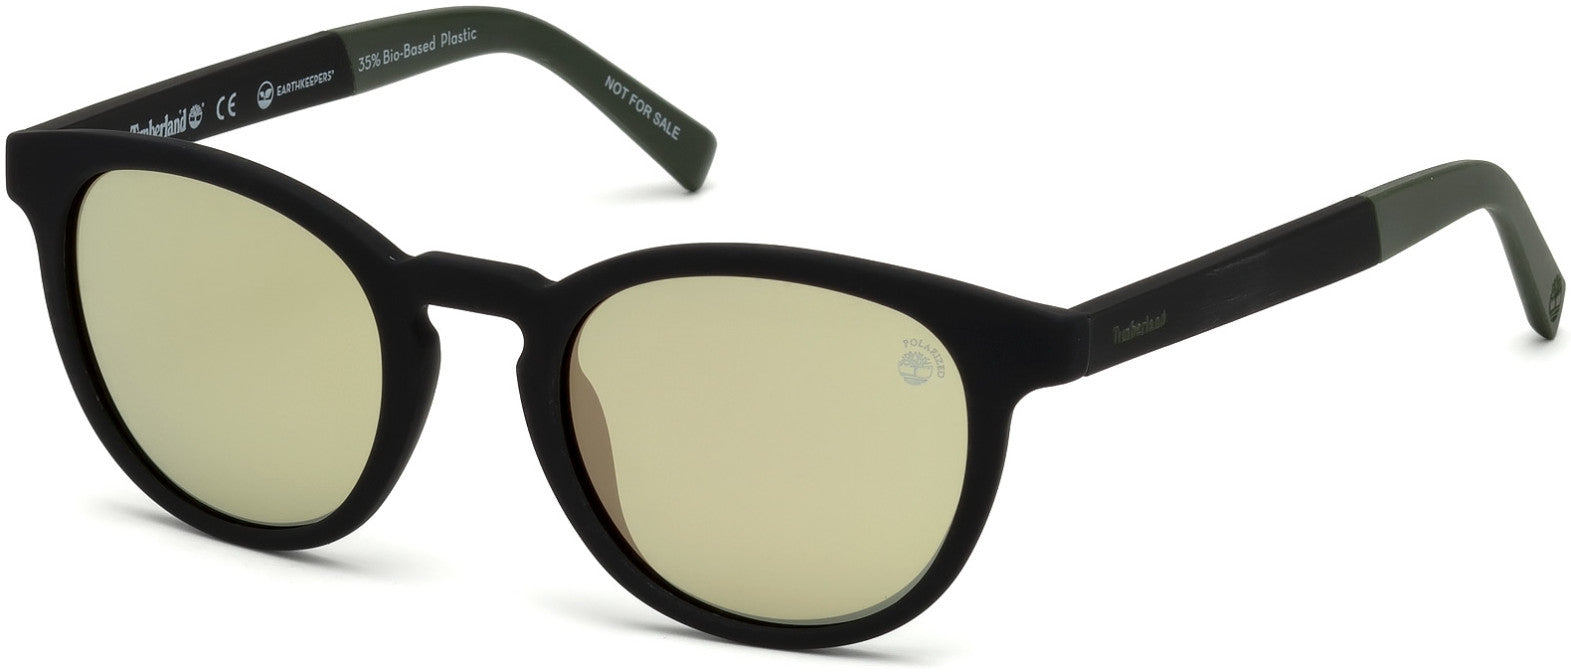 Timberland TB9128 Round Sunglasses 02R-02R - Rubberized Black Frame & Temples With Green Rubber / Gold Flash Lenses